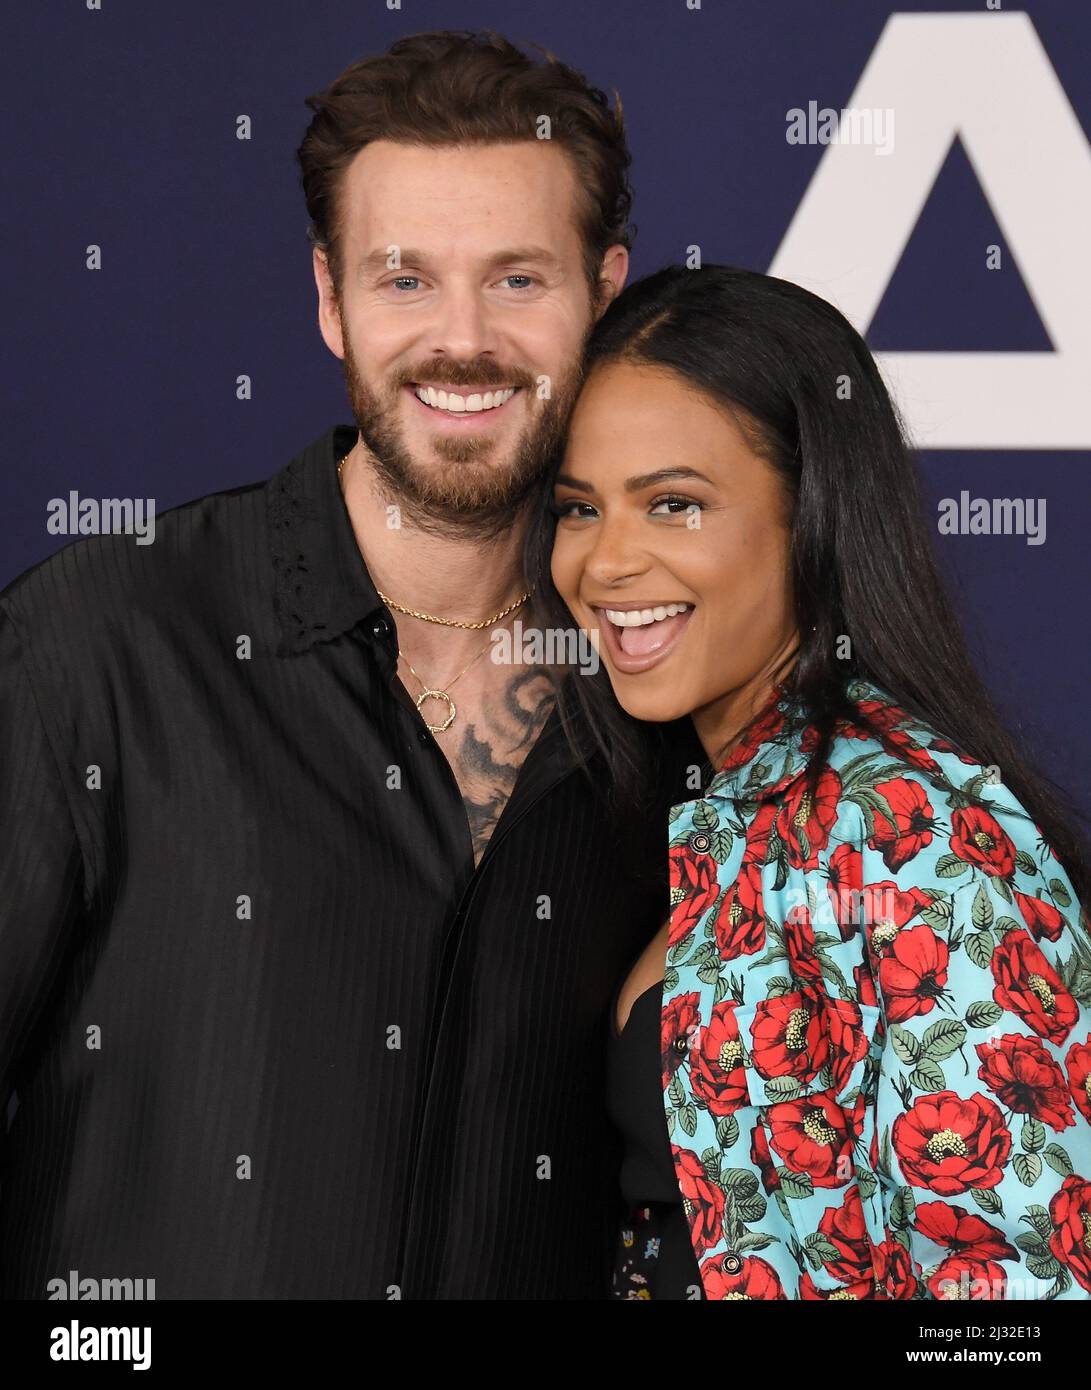 (L-R) Matt Pokora and Christina Milian at the AMBULANCE Los Angeles Premiere held at the Academy Museum of Motion Pictures in Los Angeles, CA on Monday, ?April 4, 2022. (Photo By Sthanlee B. Mirador/Sipa USA) Stock Photo